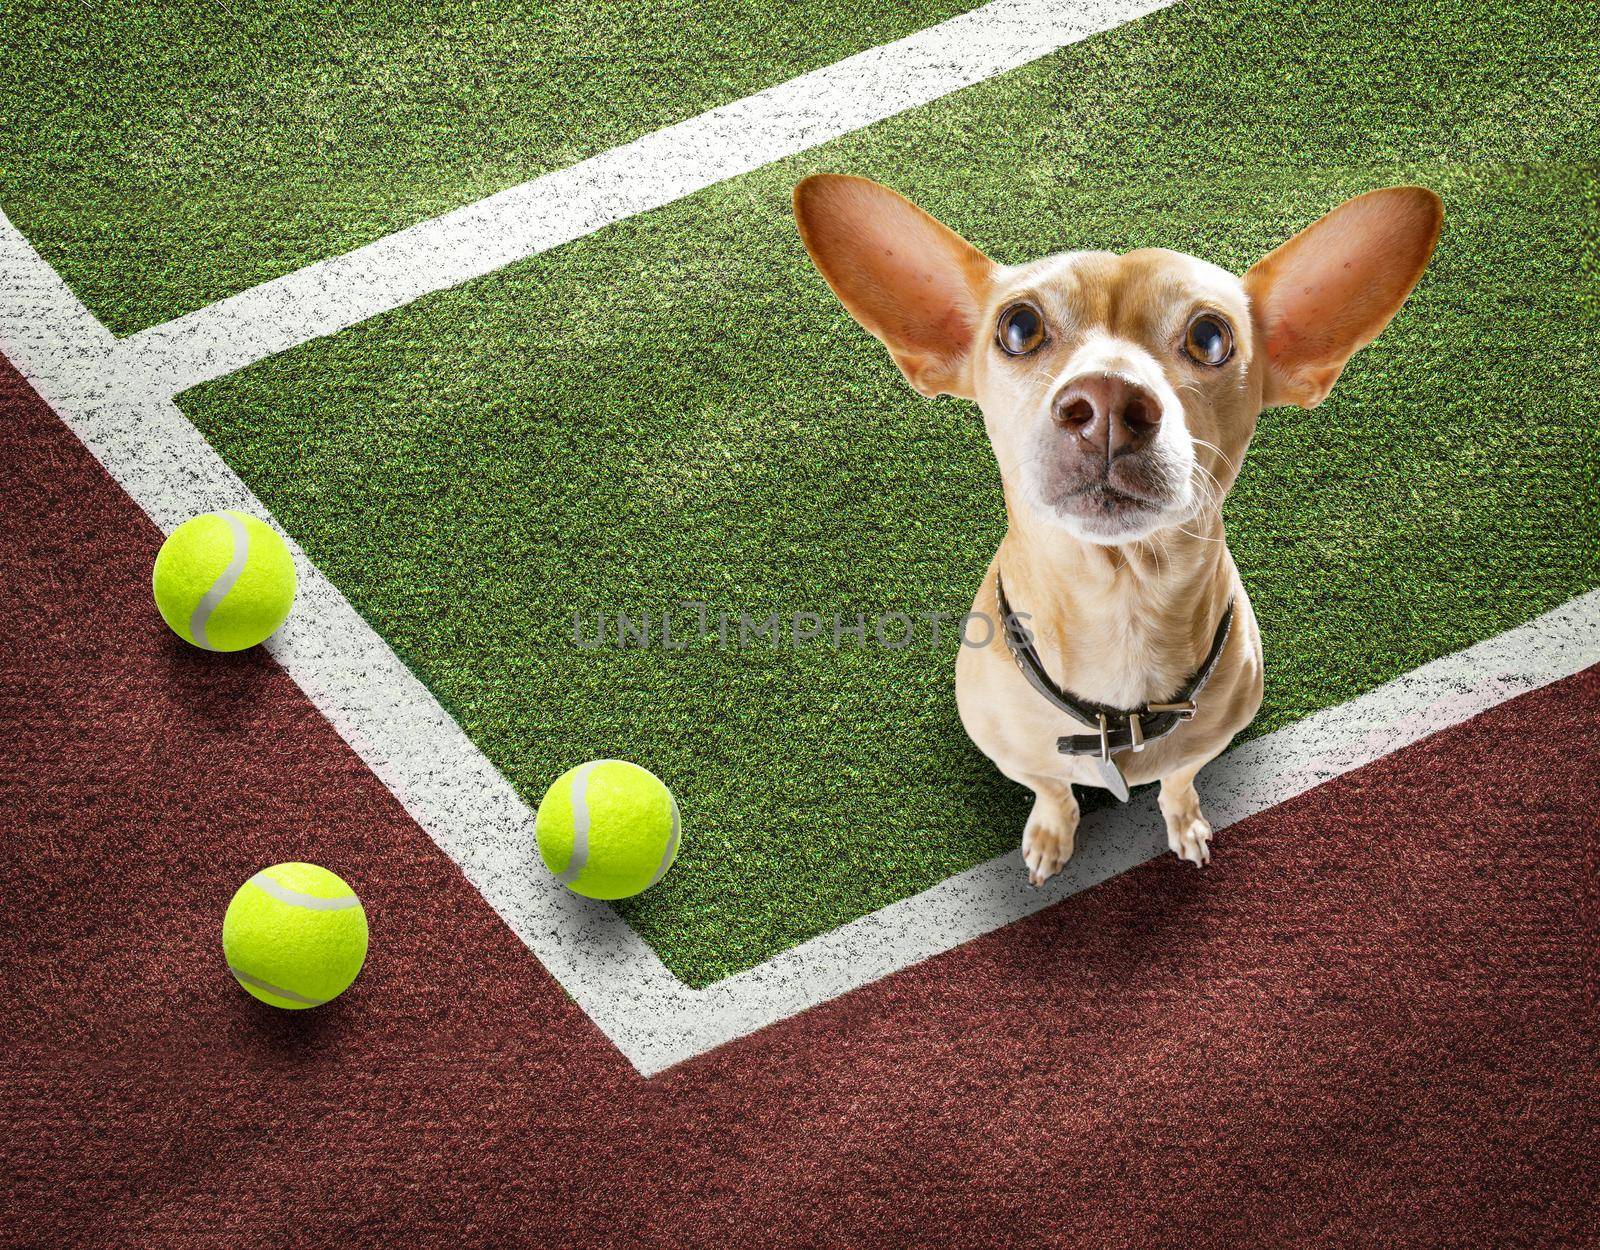 player sporty chihuahua dog on tennis field court with balls, ready for a play or game